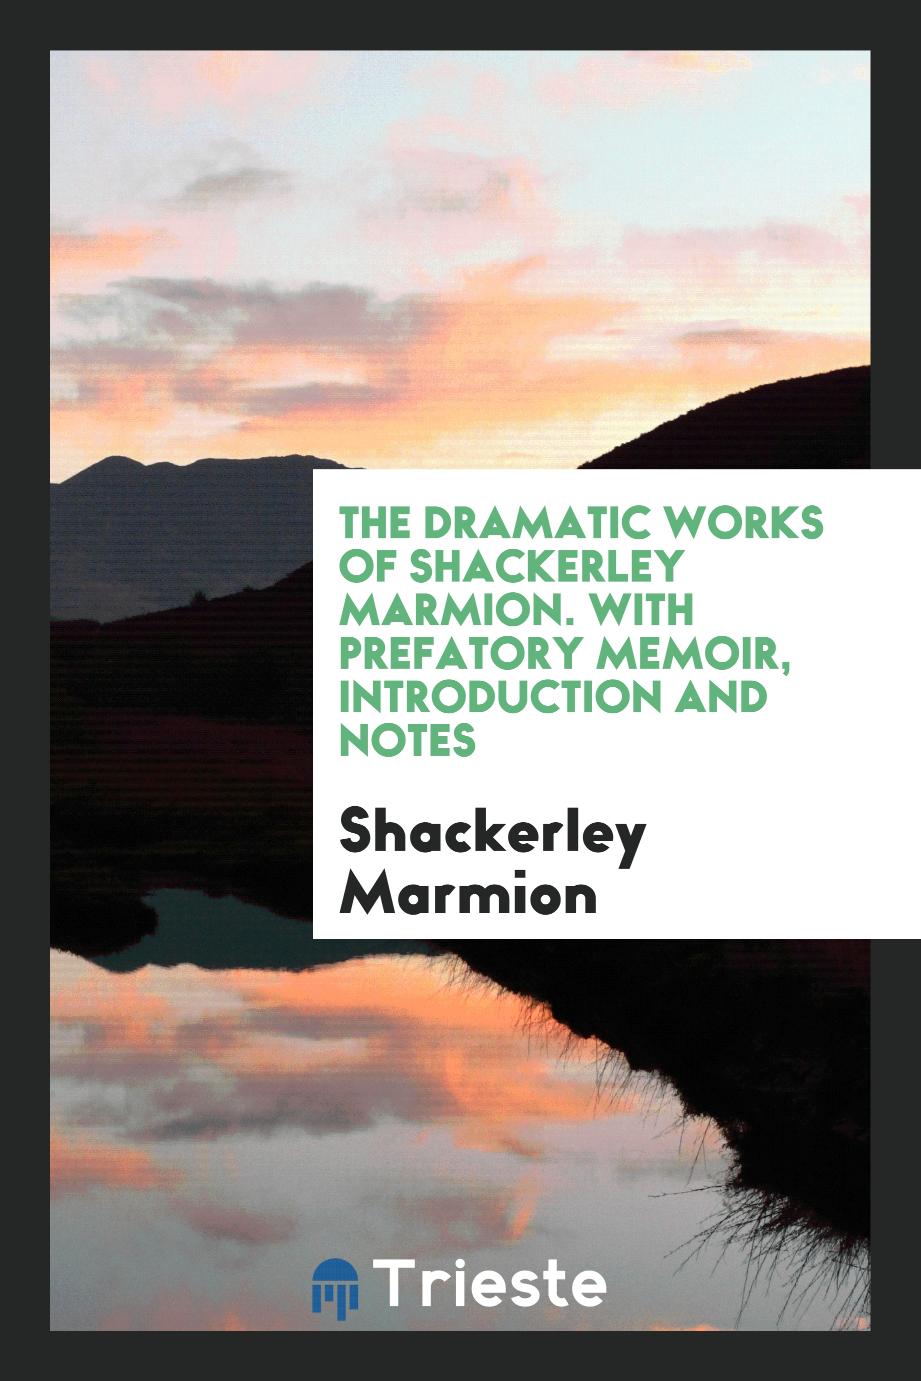 The Dramatic Works of Shackerley Marmion. With Prefatory Memoir, Introduction and Notes